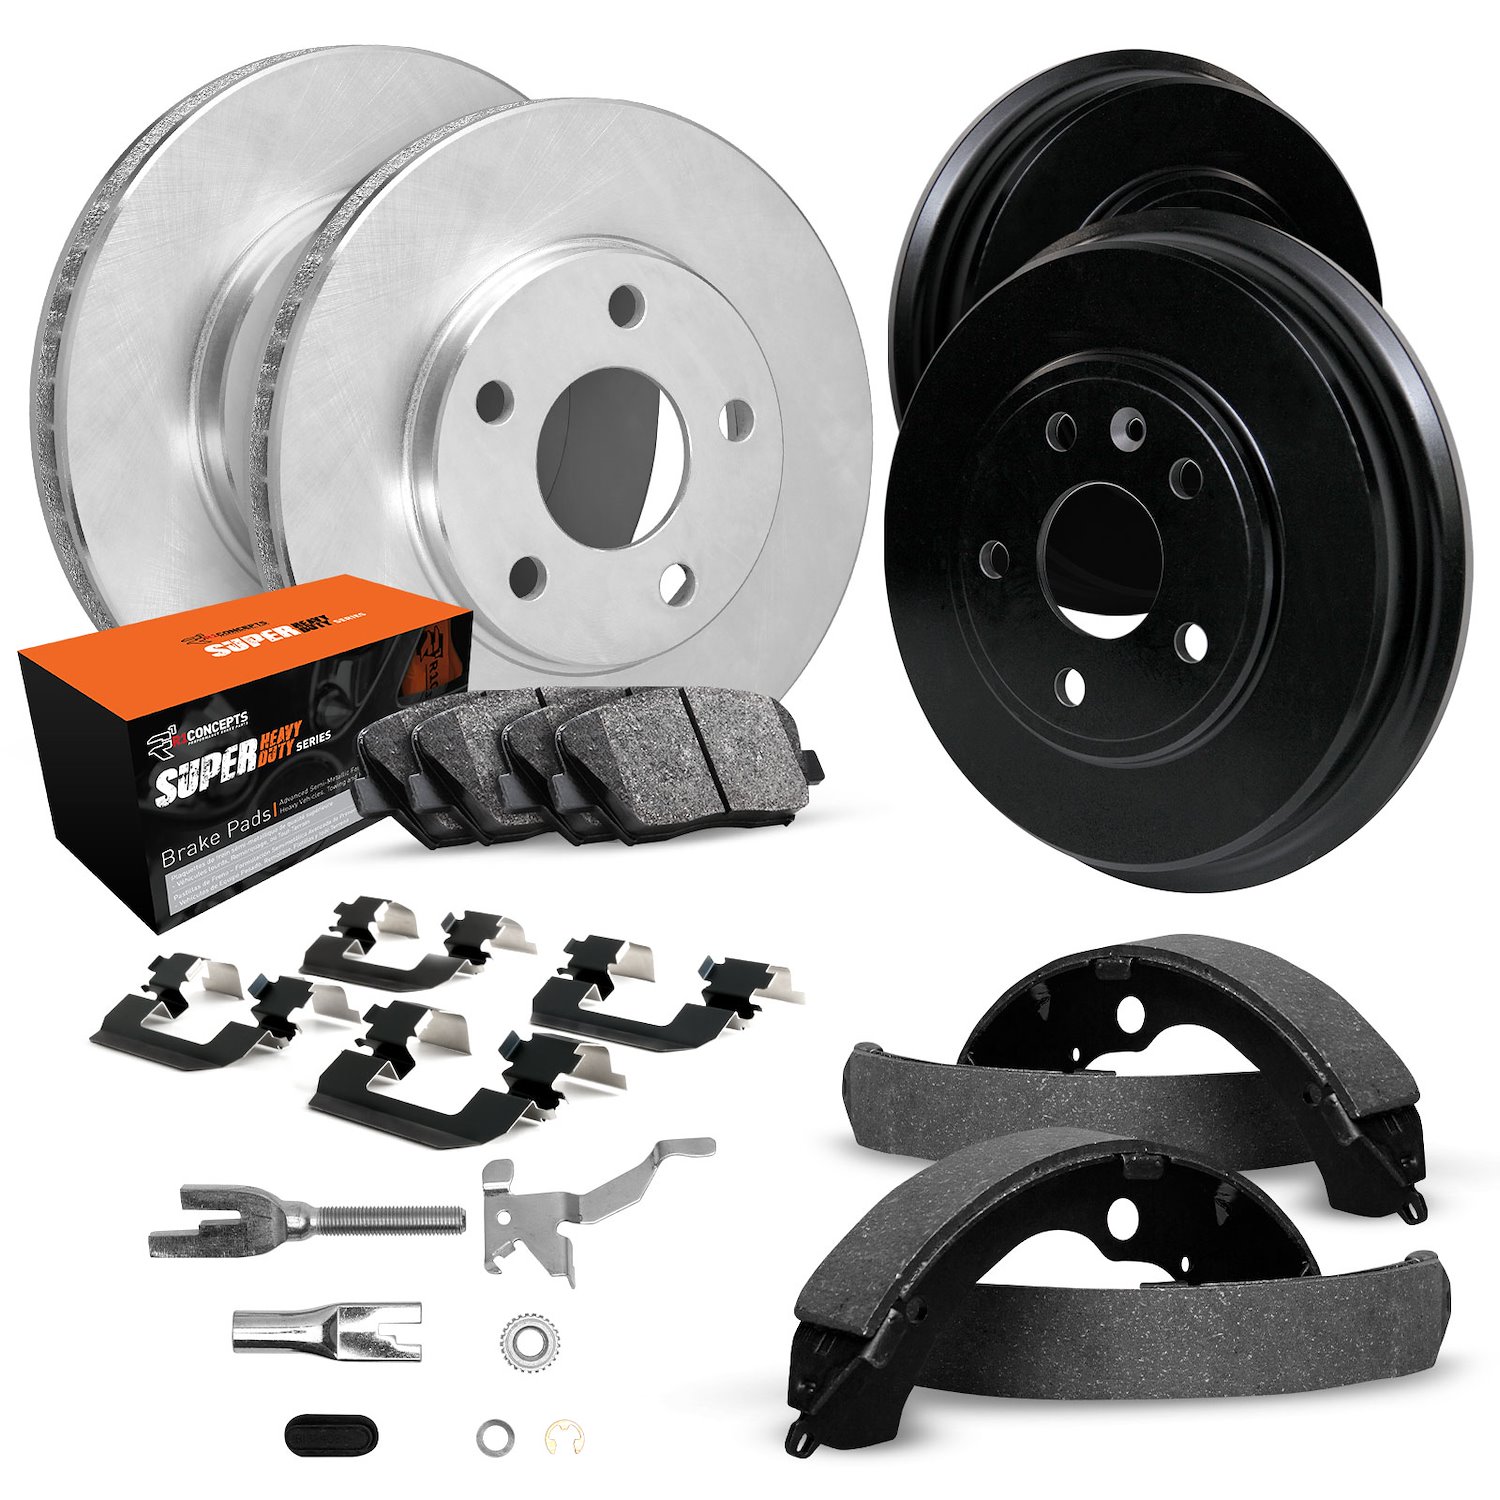 E-Line Blank Brake Rotor & Drum Set w/Super-Duty Pads, Shoes, Hardware, & Adjusters, 1976-1977 GM, Position: Front & Rear